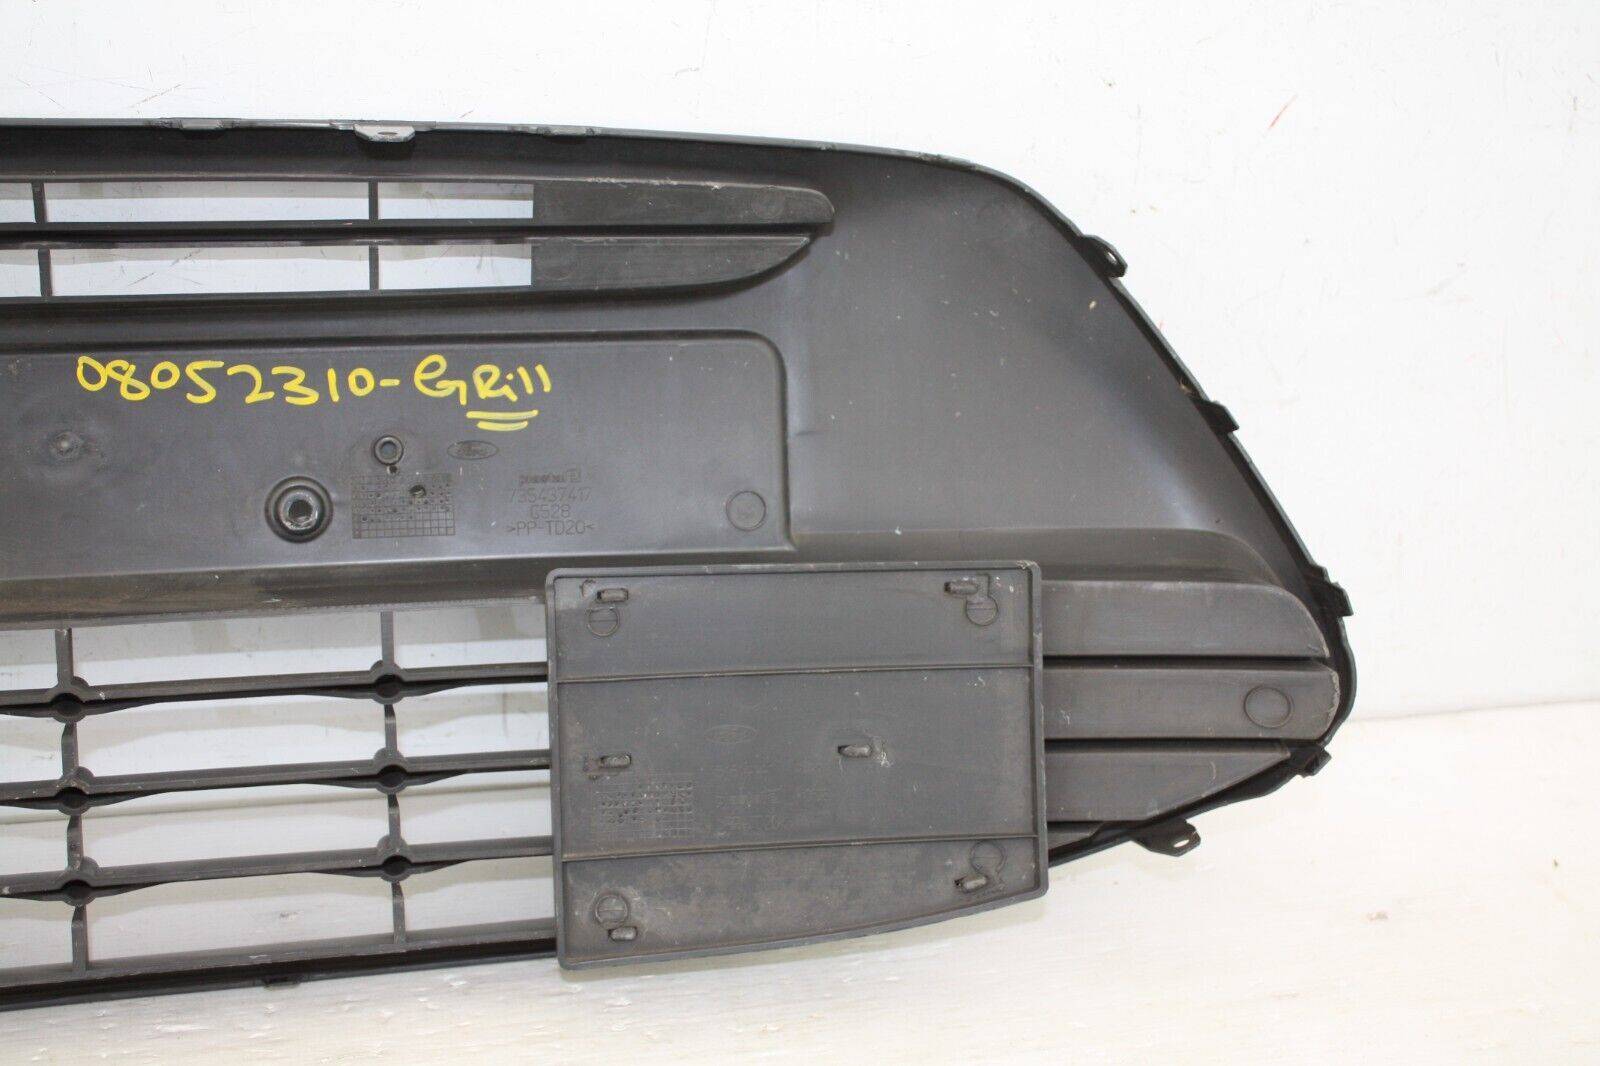 Ford-KA-Front-Bumper-Grill-2009-TO-2016-735437417-Genuine-GOT-DEEP-SCRATCHES-175720937010-11